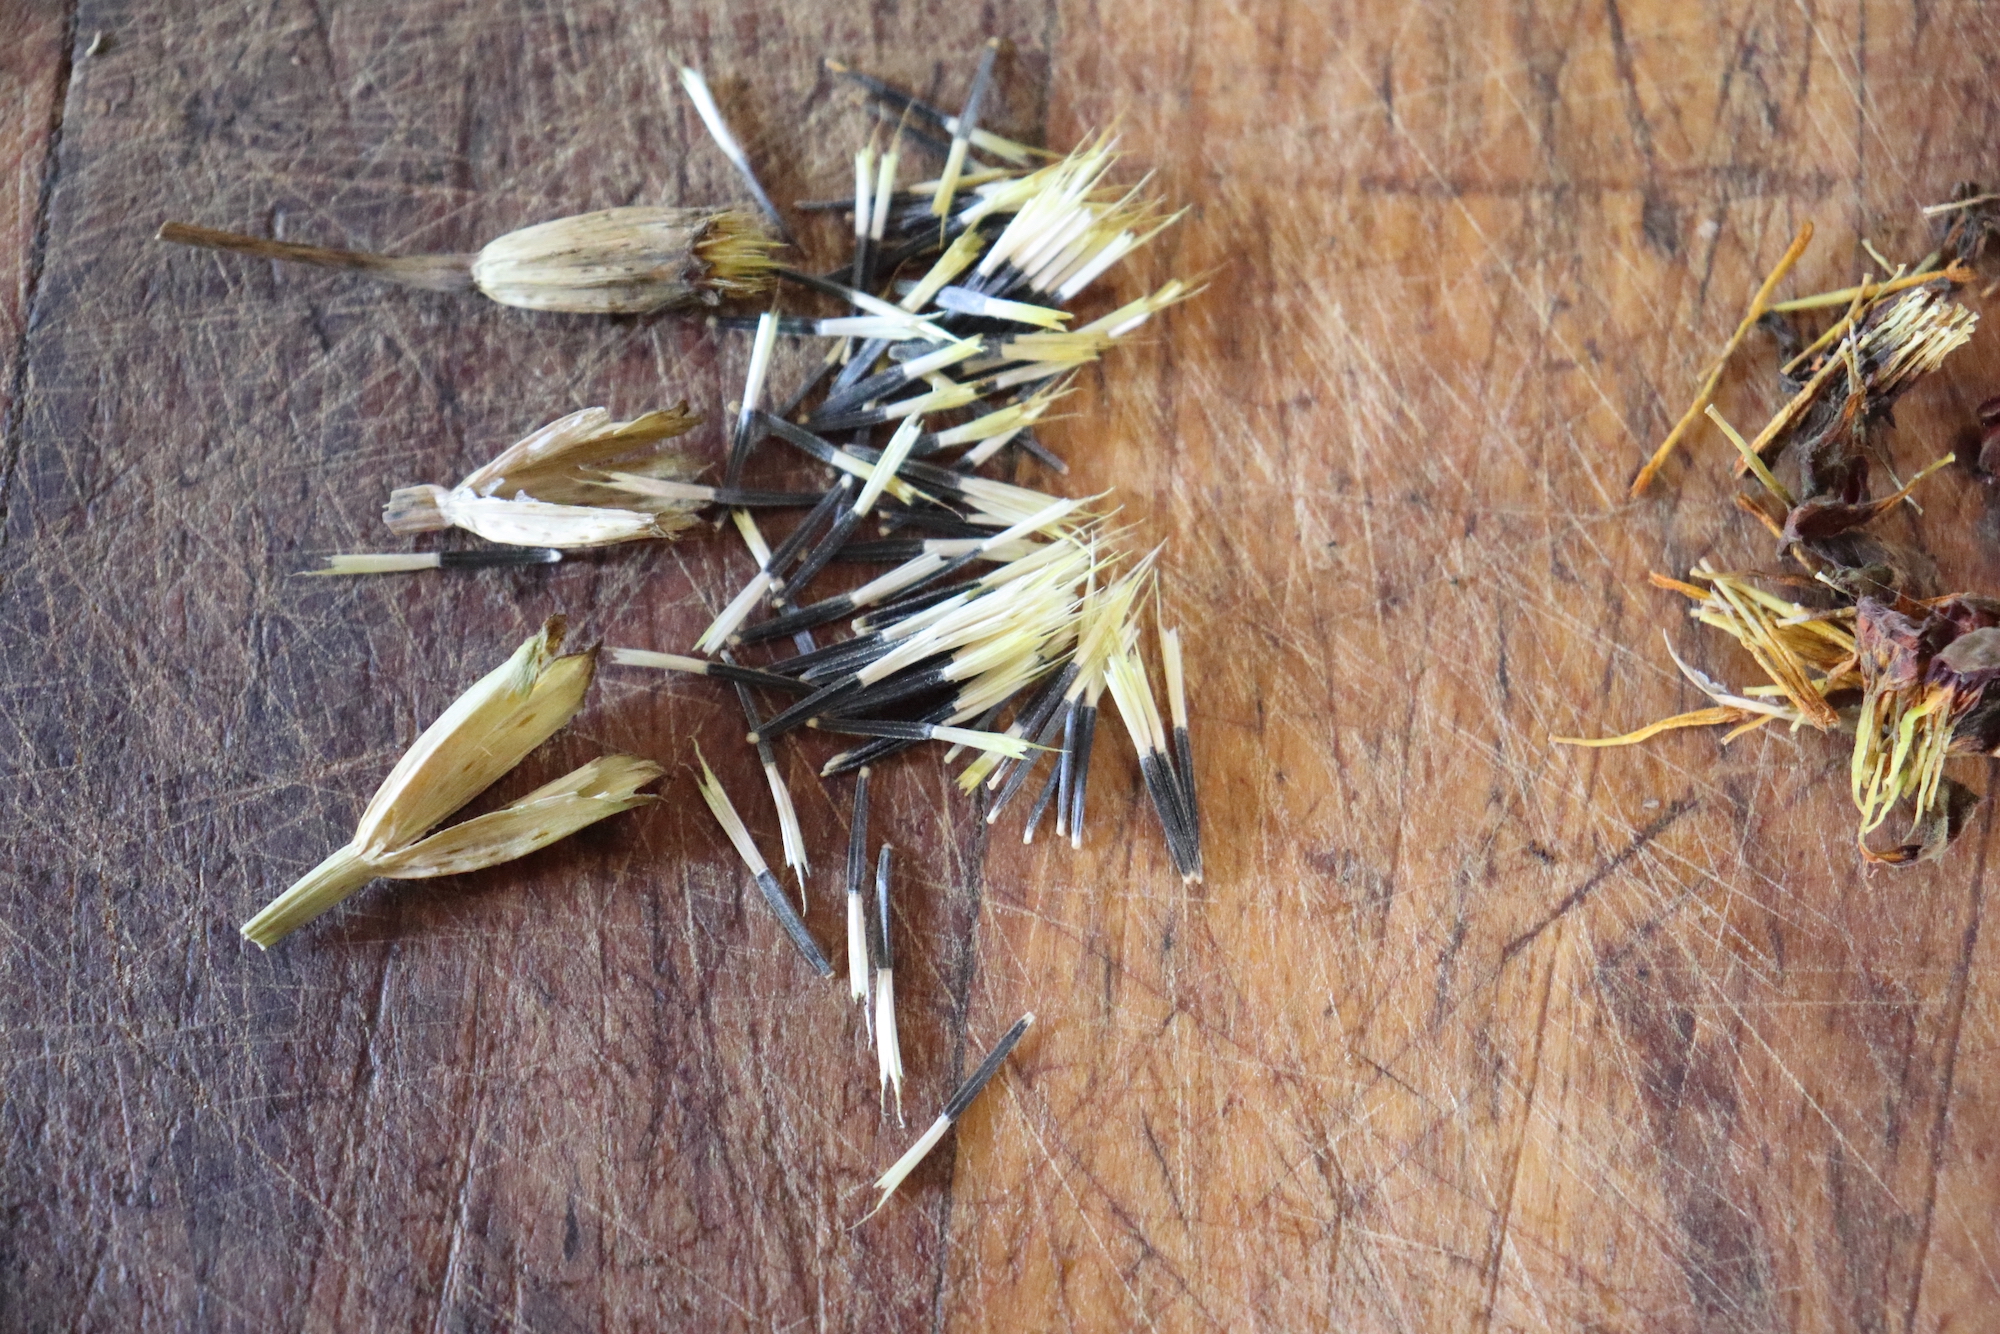 Marigold Seed pods (left), seeds (middle), dry petals (right)